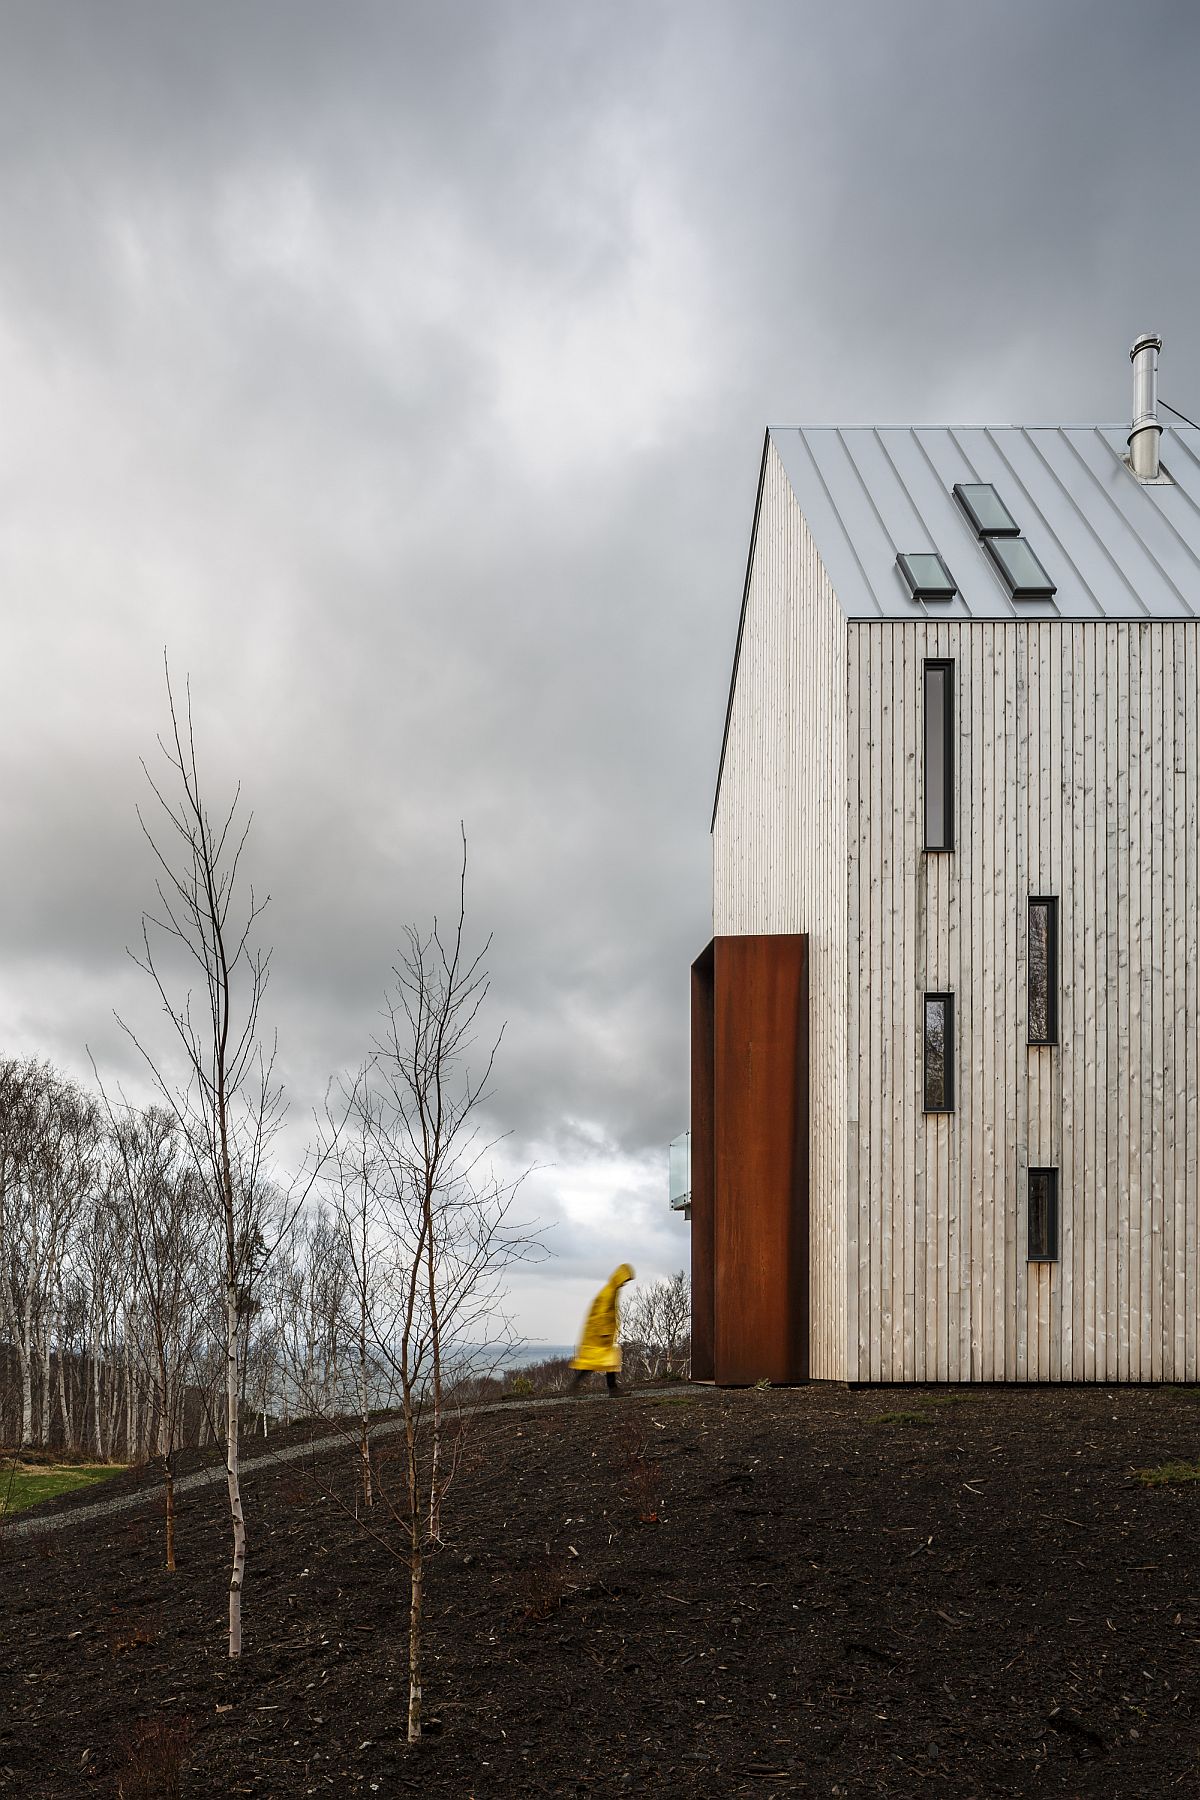 Entry of the cabin acts as a windbreaker and is inspired by local design